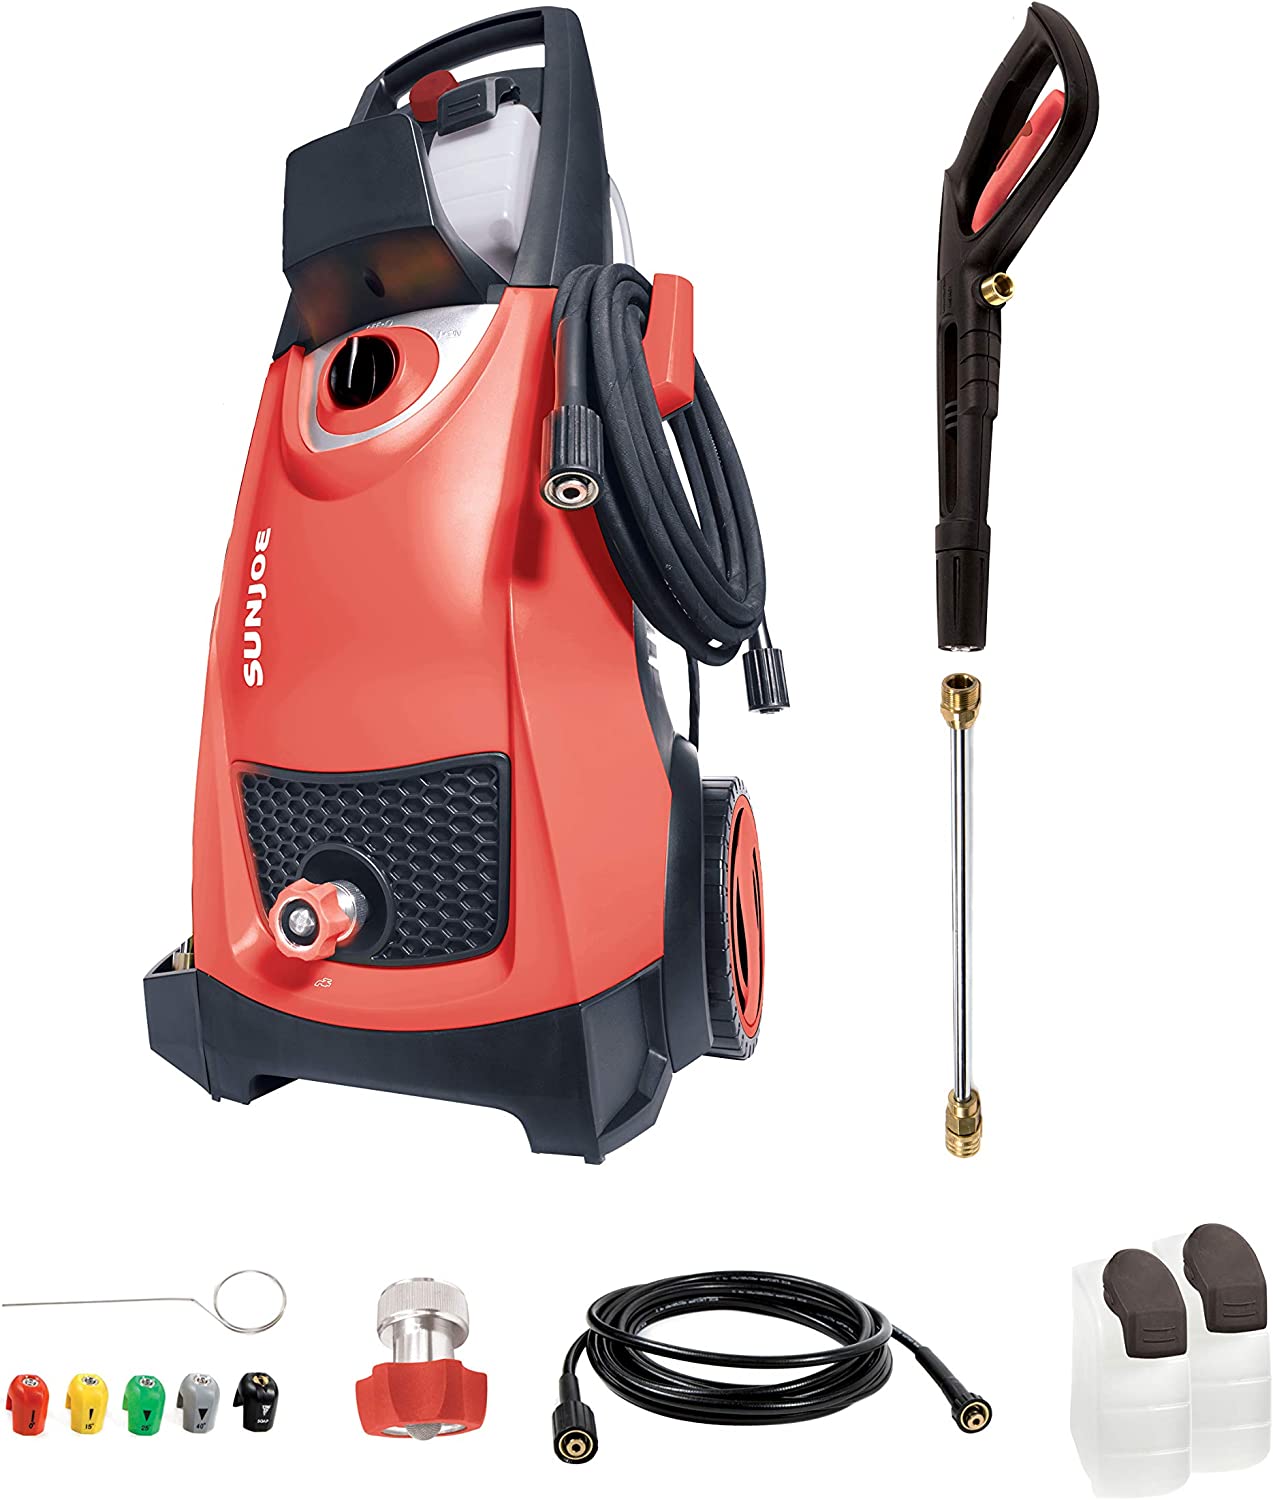 Sun Joe SPX3000-RED 2030 Max Psi 1.76 Gpm 14.5-Amp Electric Pressure Washer, Red